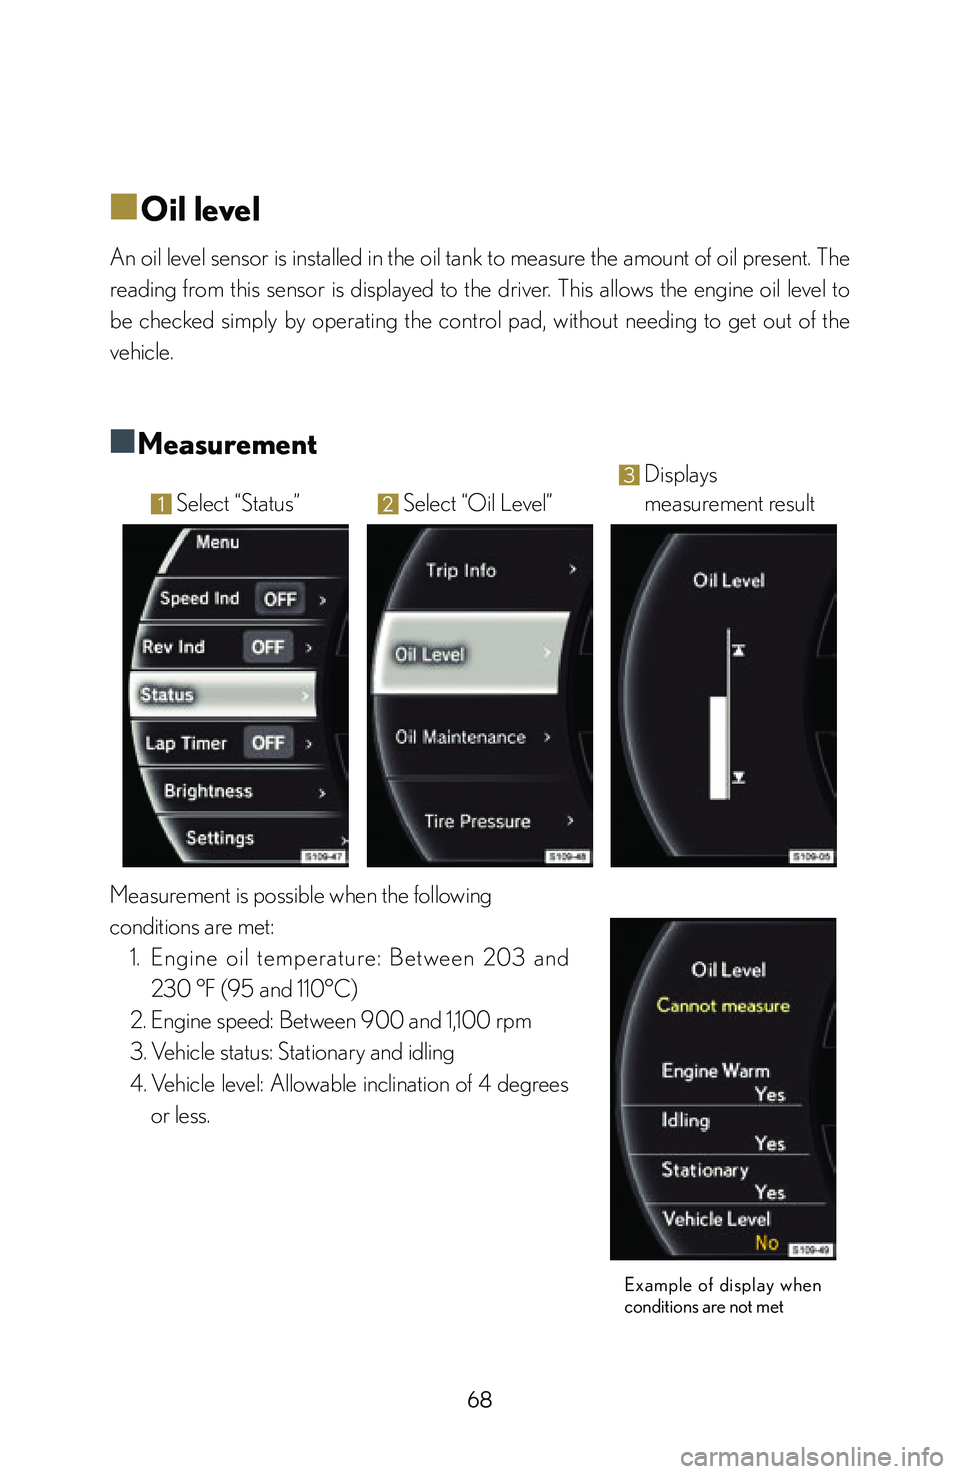 lexus LFA 2012  Owners Manual / LEXUS 2012 LFA: INSIDE THE LFA 68
■
■Oil level
An oil level sensor is installed in the oil tank to measure the amount of oil present. The 
reading  from  this  sensor  is  displayed  to  the  driver.  This  allows  the  engine 